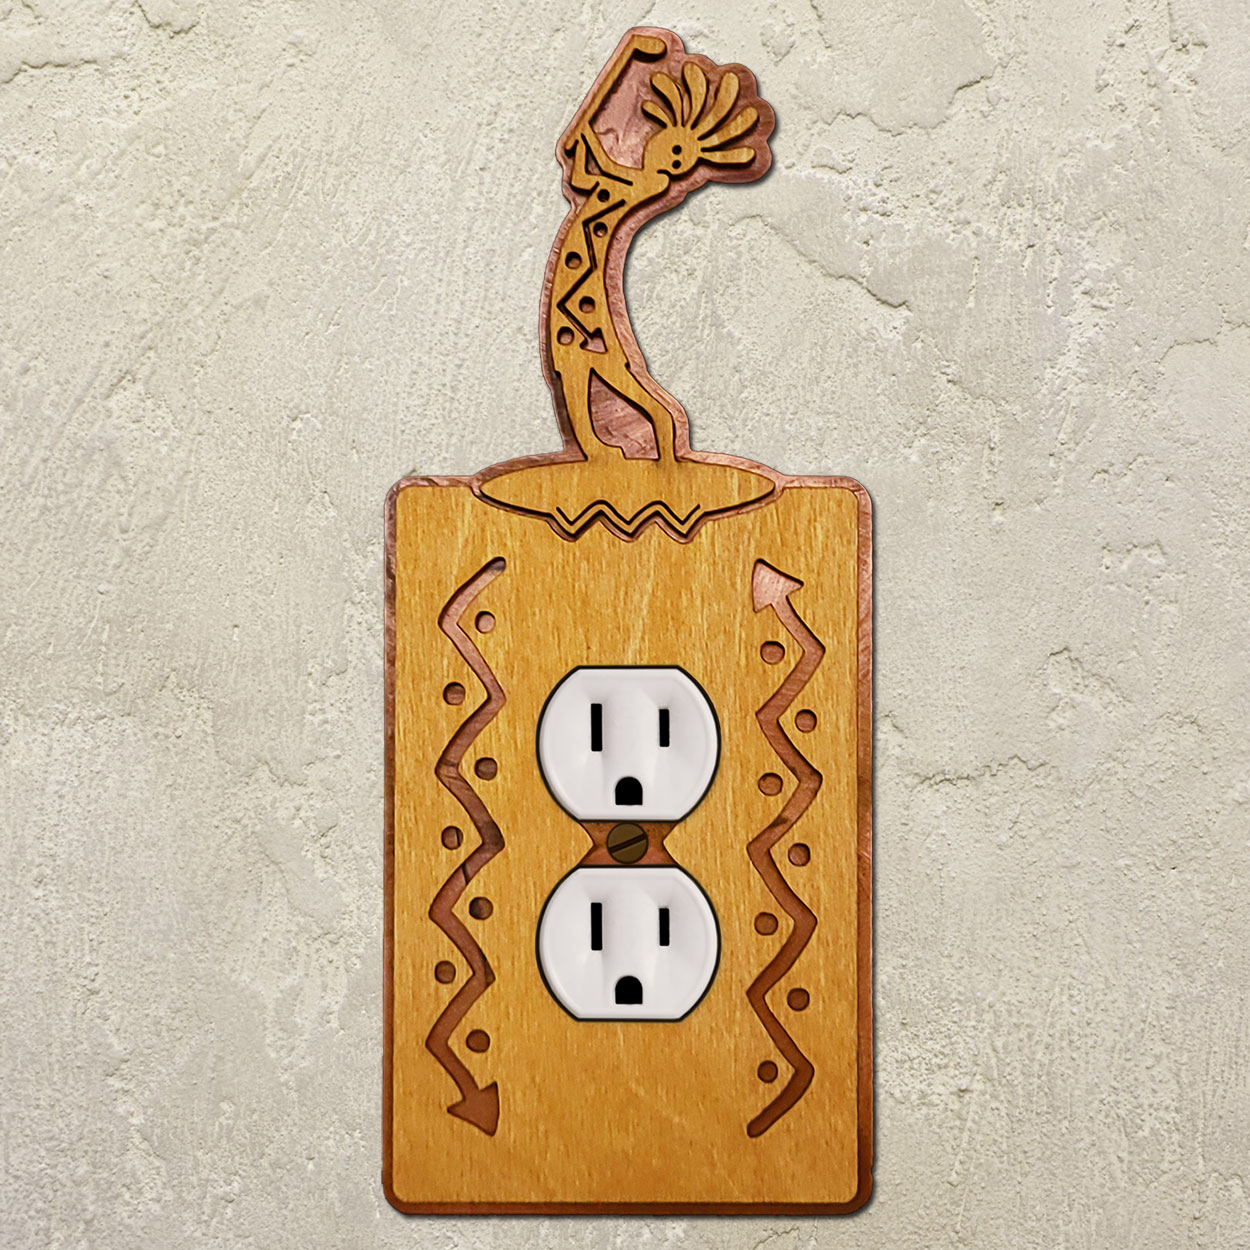 167720 - Kokopelli Golfer Wood and Metal Single Outlet Cover in Golden Sienna Finish